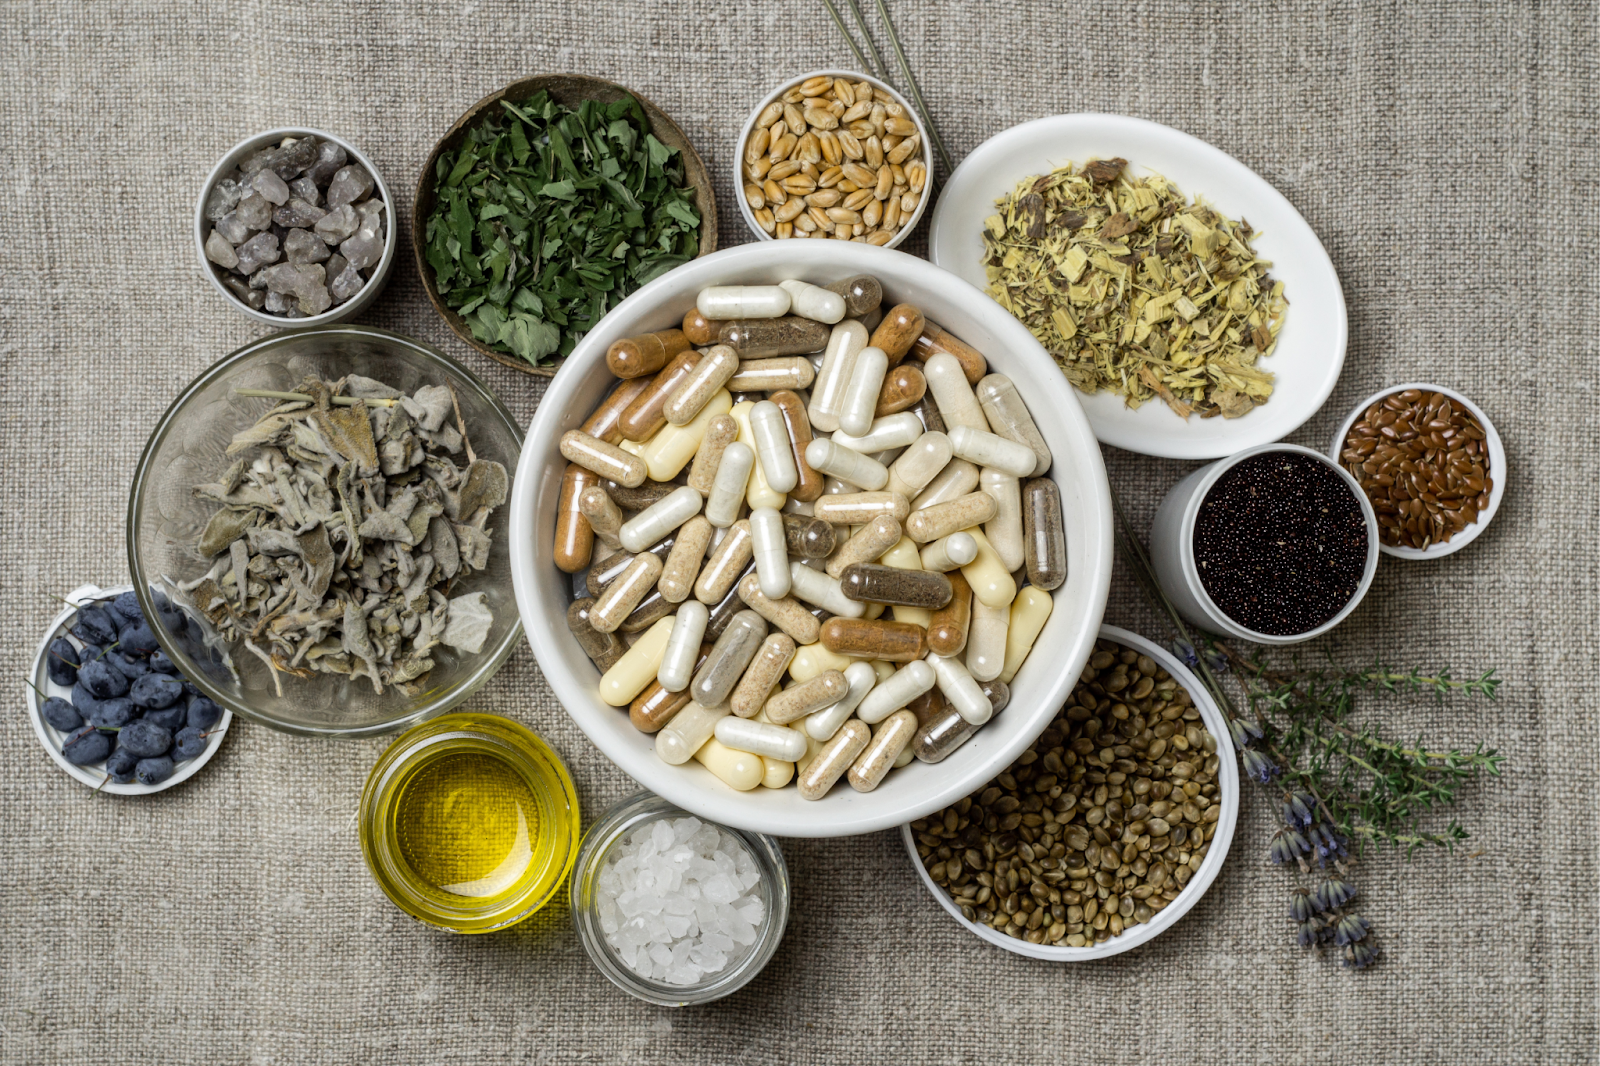 Some Herbal Supplements May Lack Scientific Support